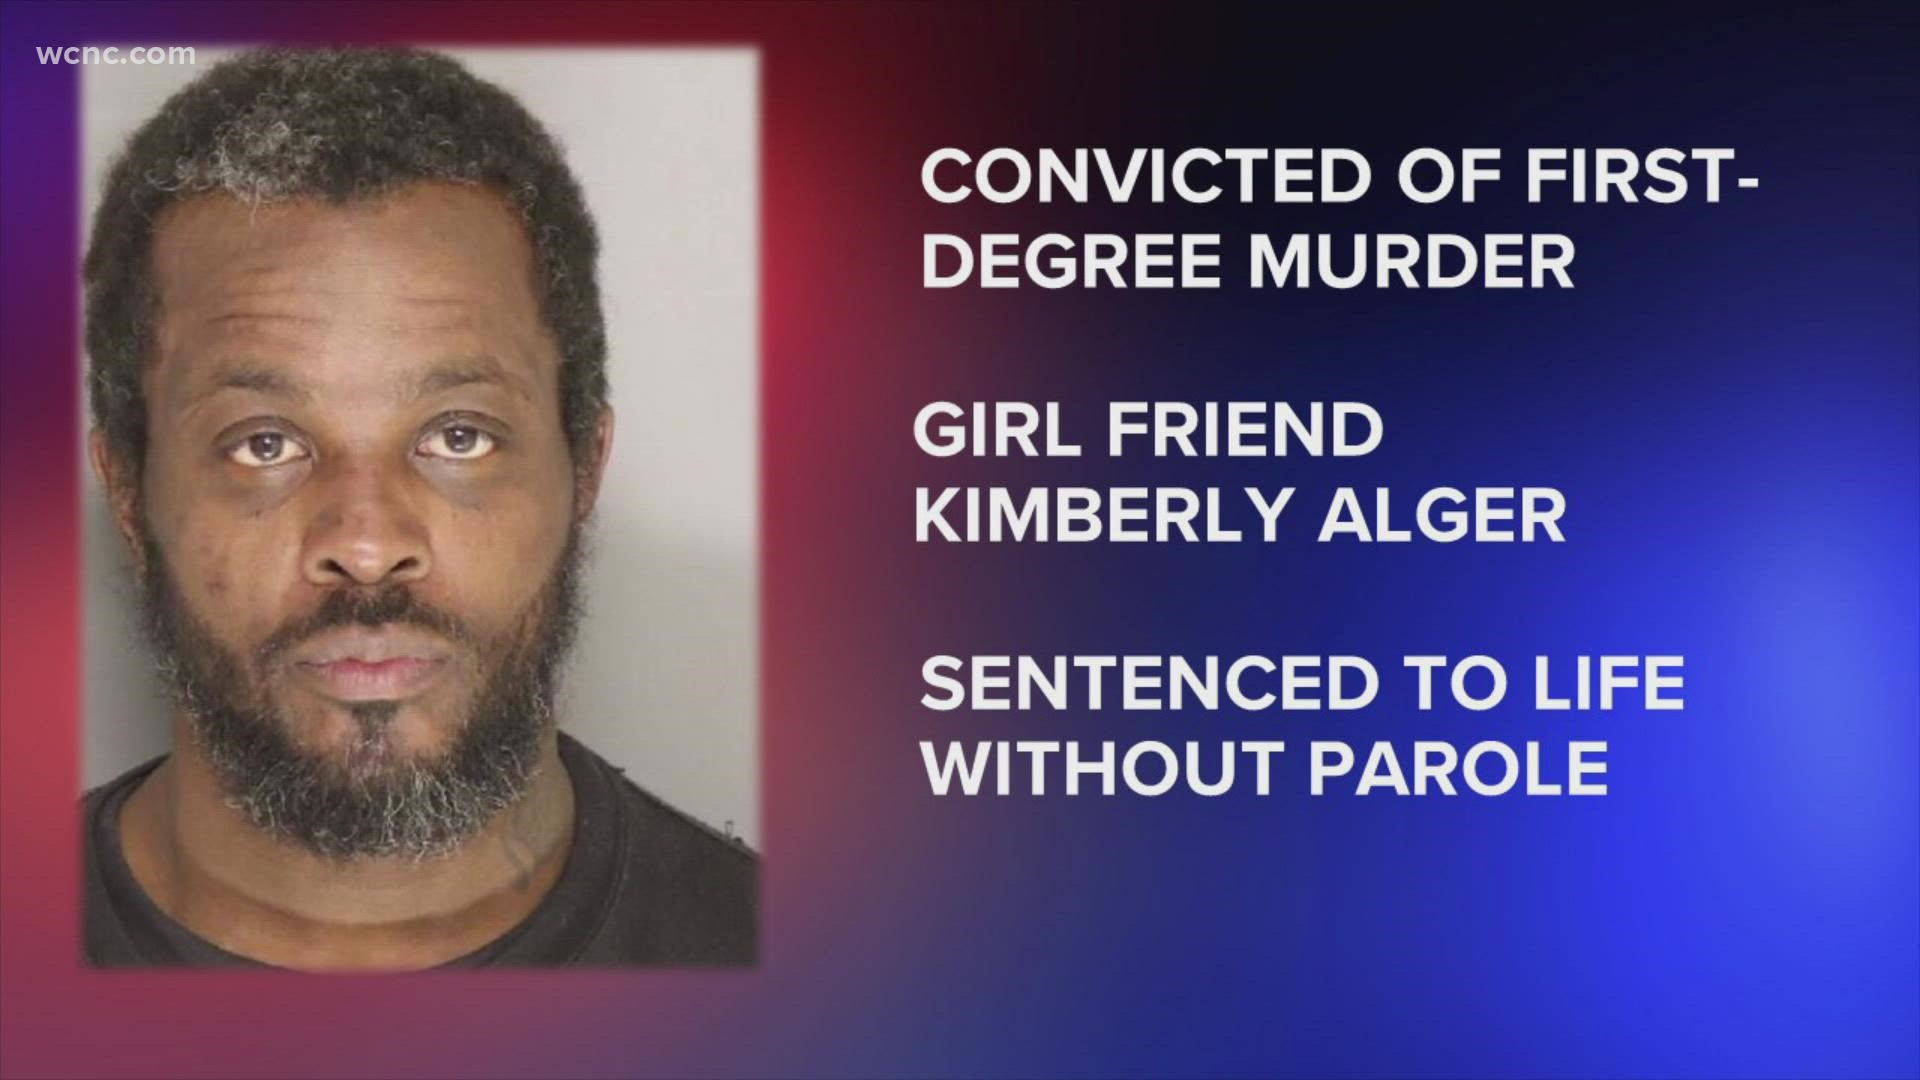 Derrick Allen McIlwain will spend the rest of his life in prison for the 2019 murder of his girlfriend in Lancaster County, South Carolina.